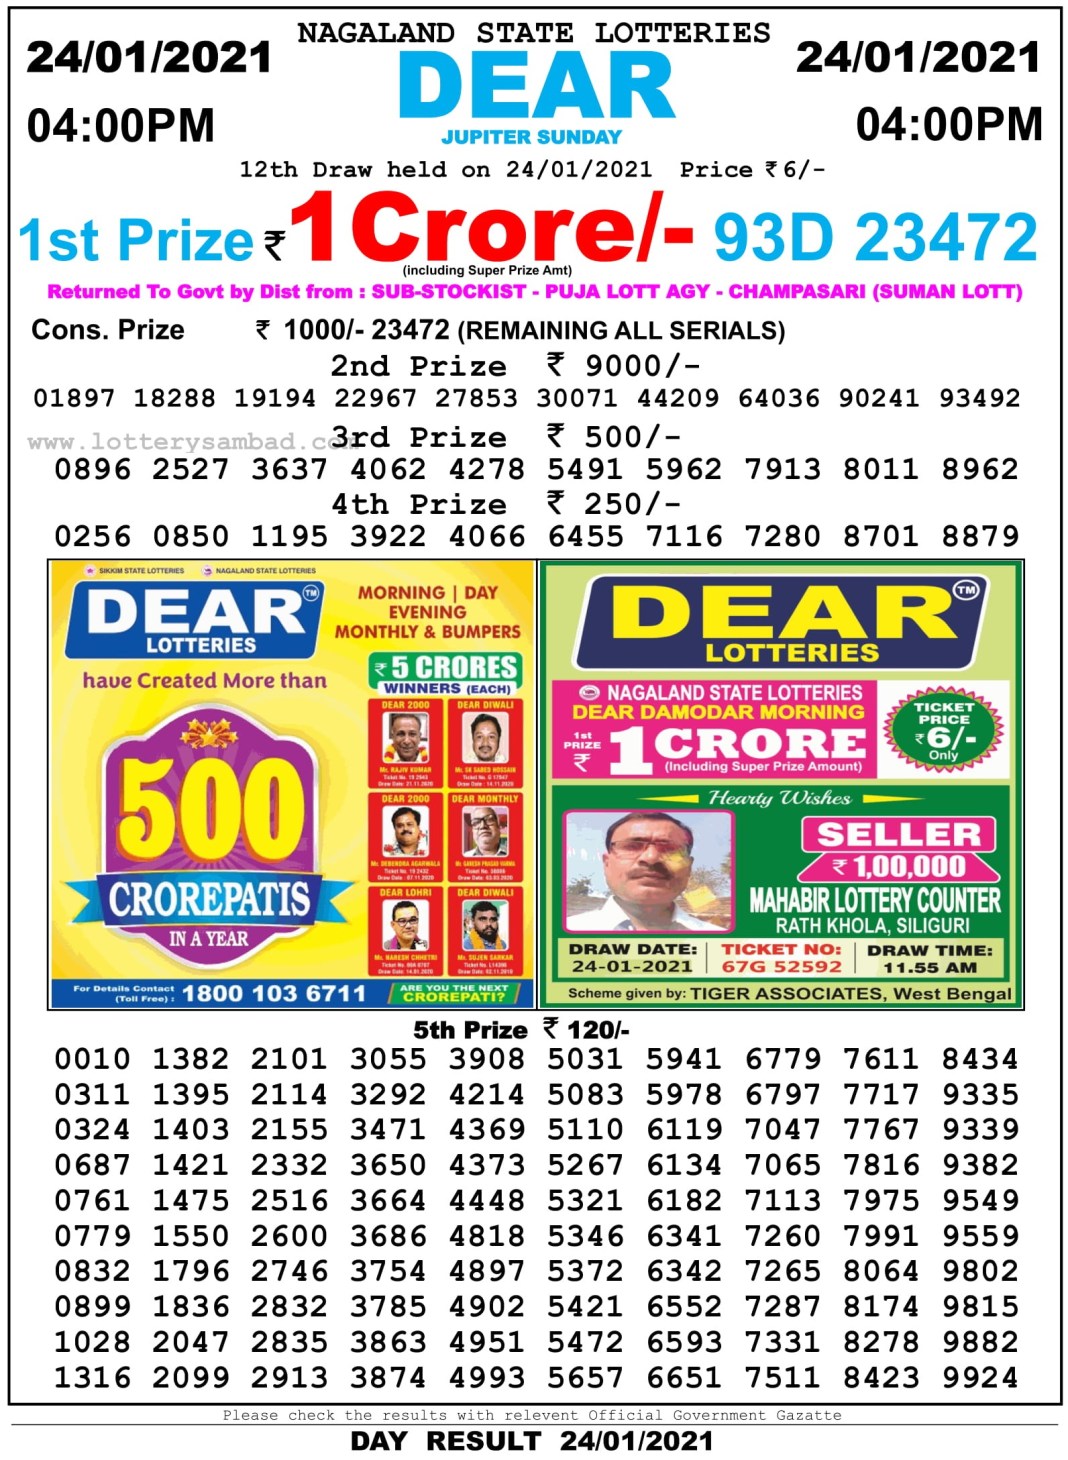 DEAR DAILY 4PM LOTTERY RESULT 24.1.2021